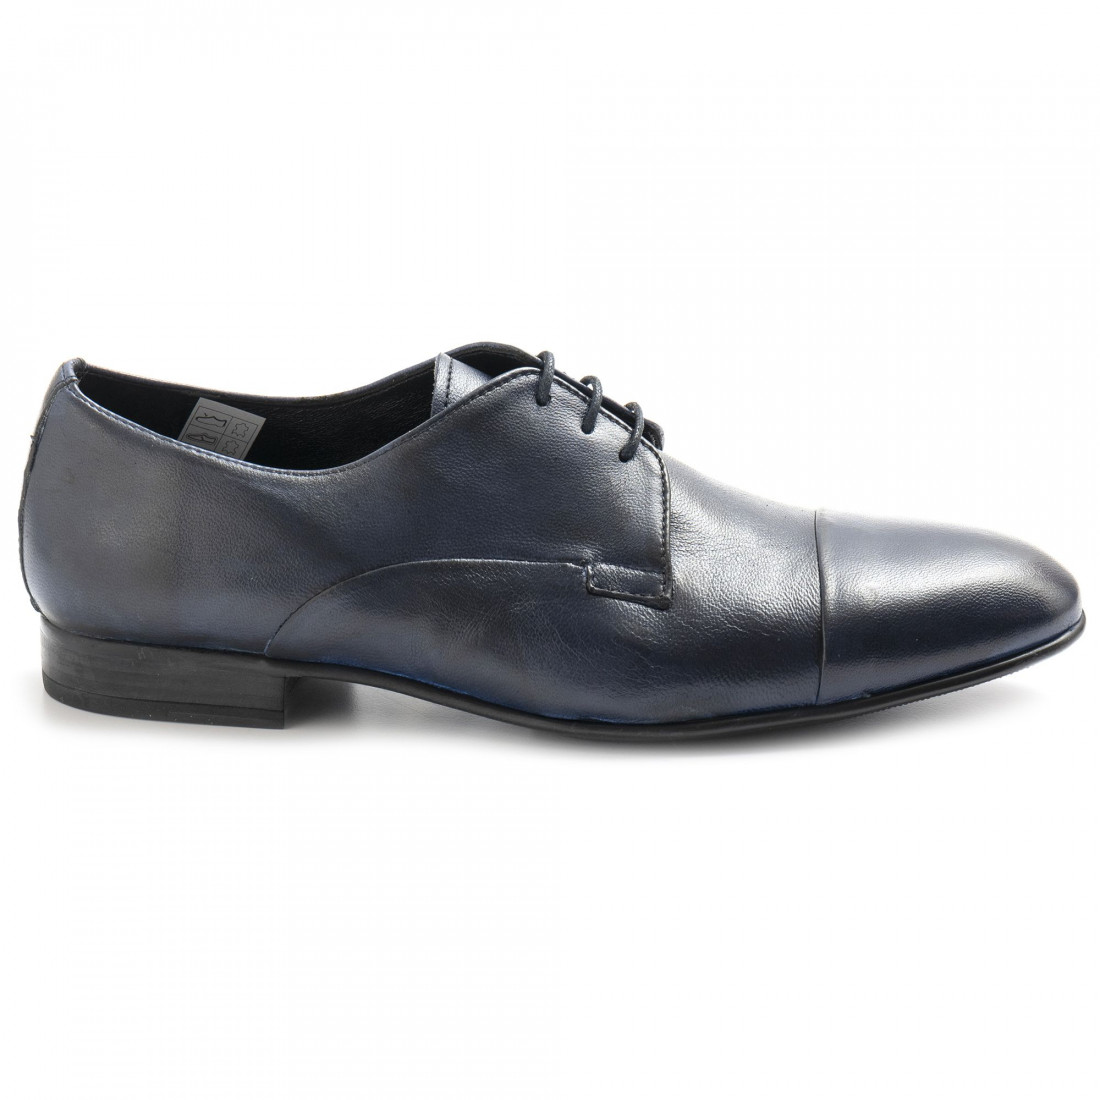 Sangiorgio men's derby shoes in brawn hand waxed leather